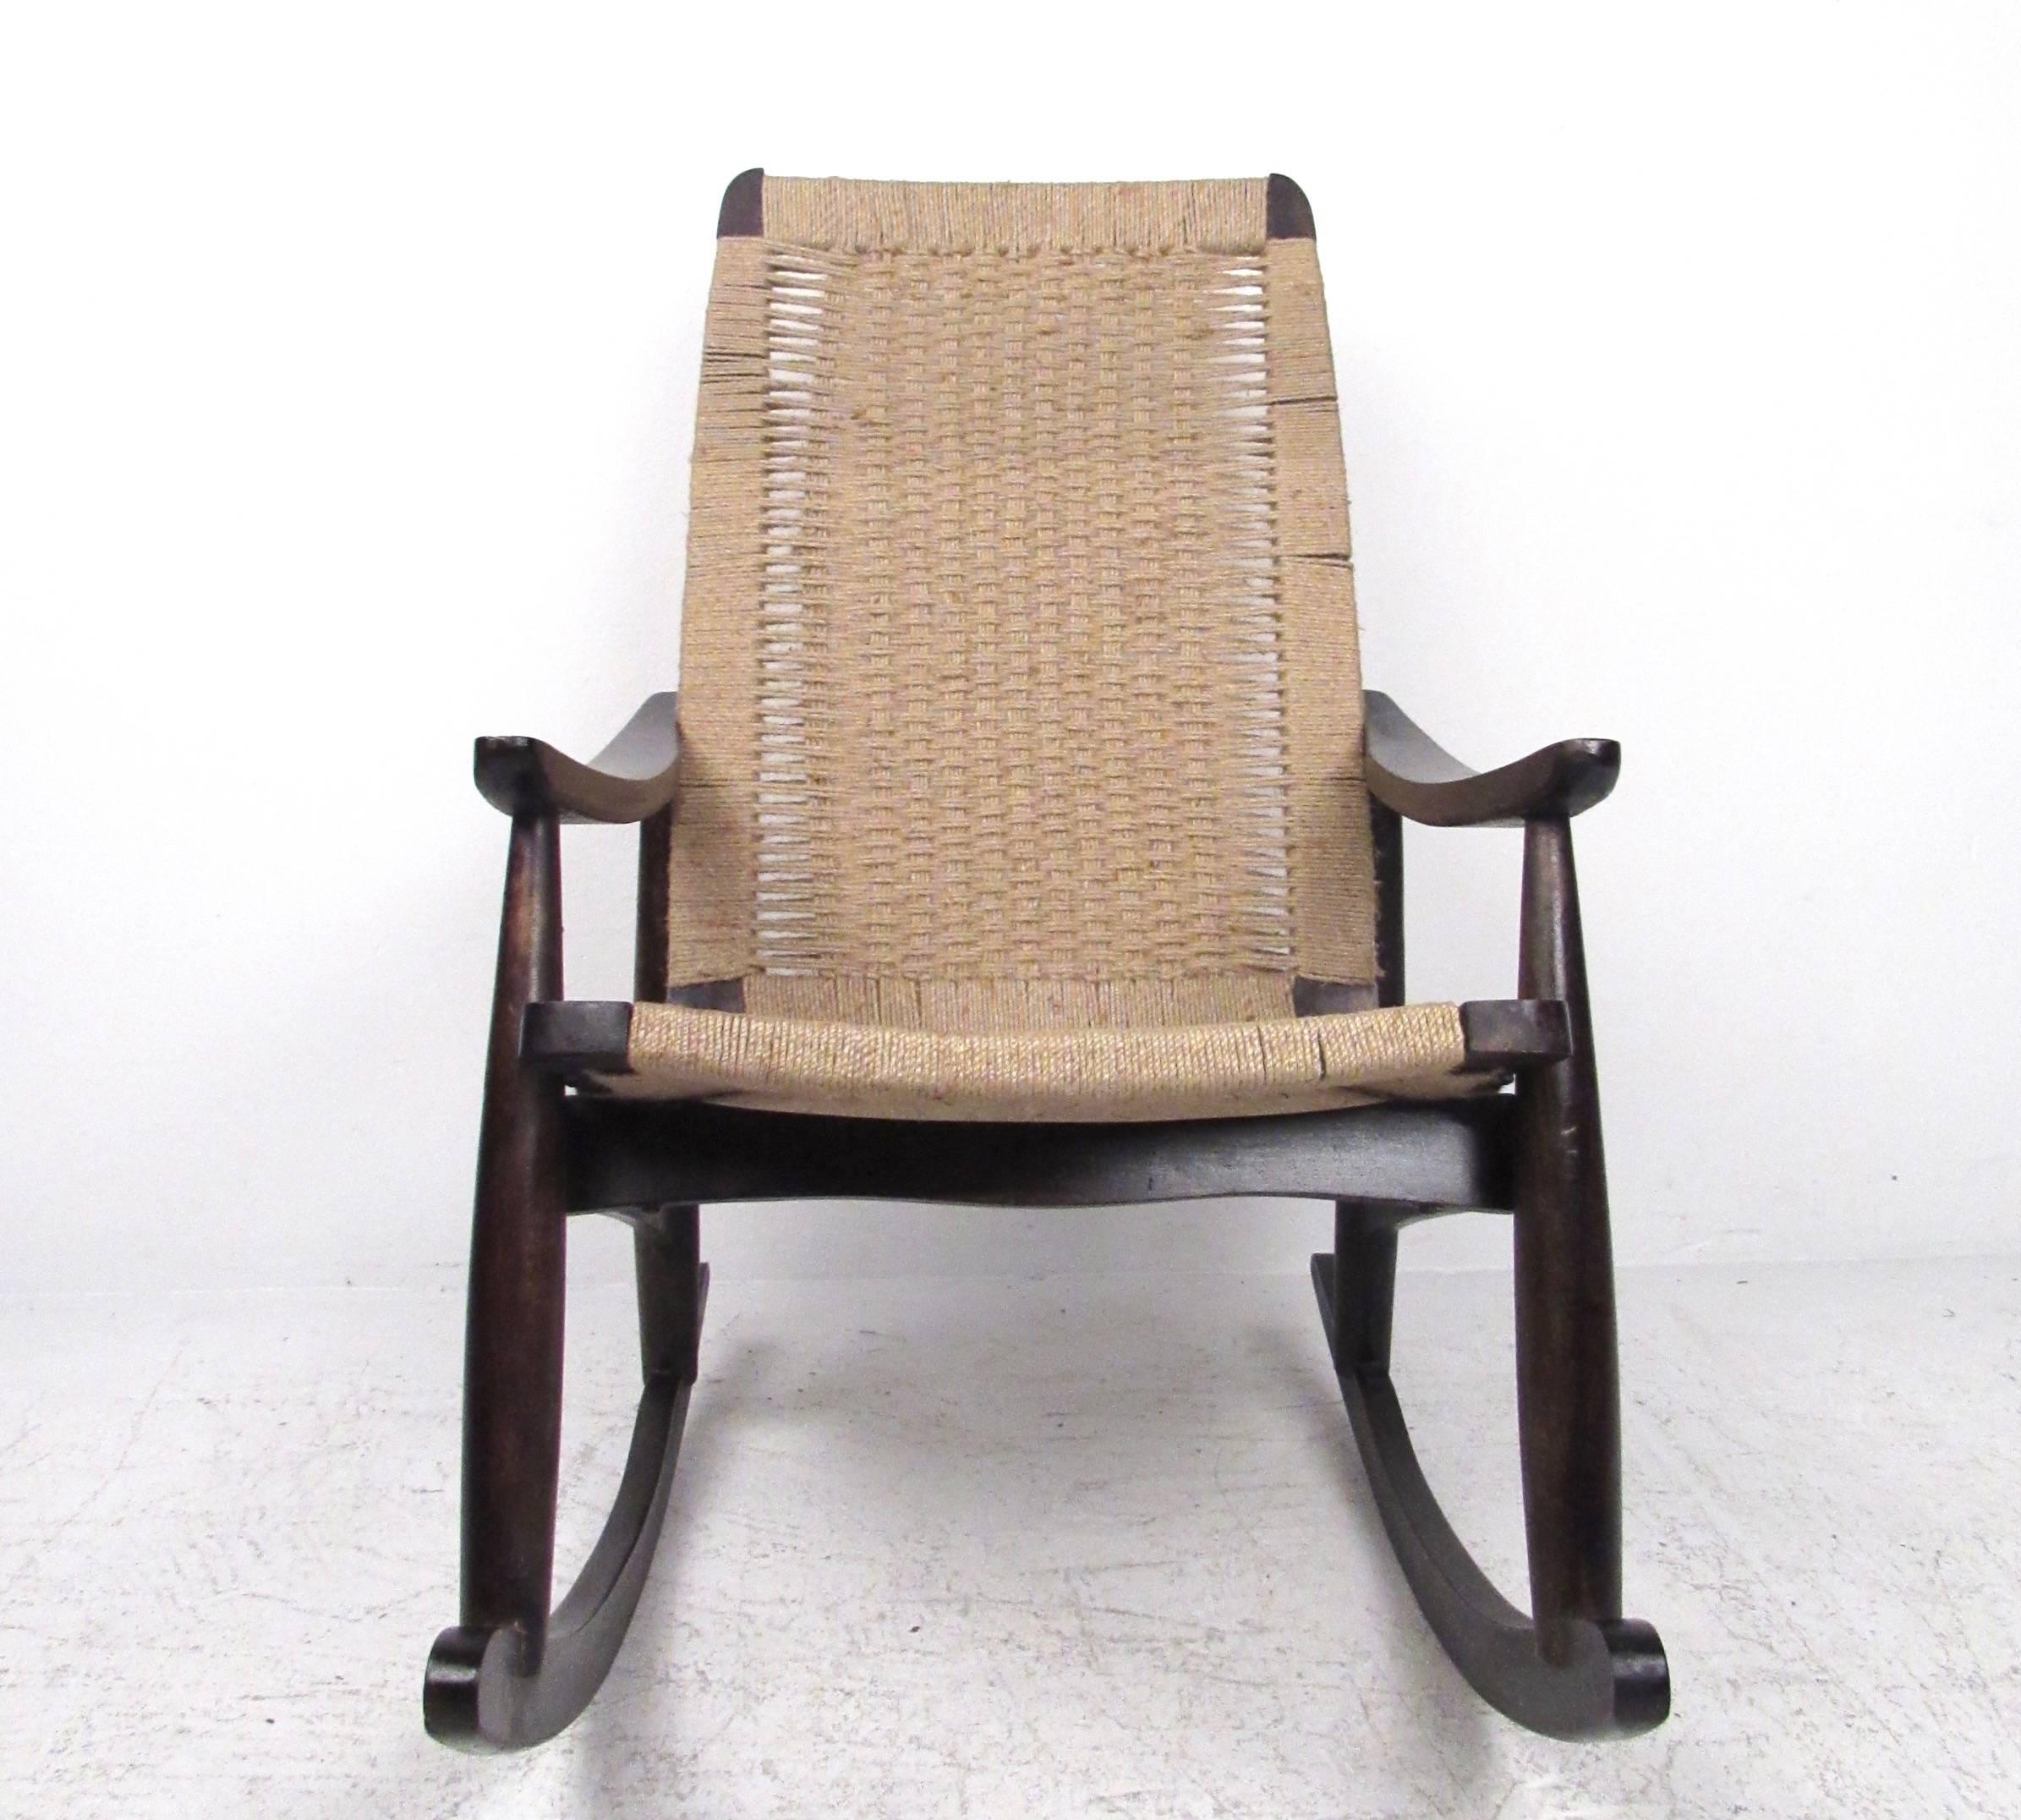 This vintage modern rocking chairs features woven seat on a hardwood frames. Angled armrests and comfortable proportions add to the Mid-Century charm of this Hans Wegner style rocking chair. Please confirm item location (NY or NJ).